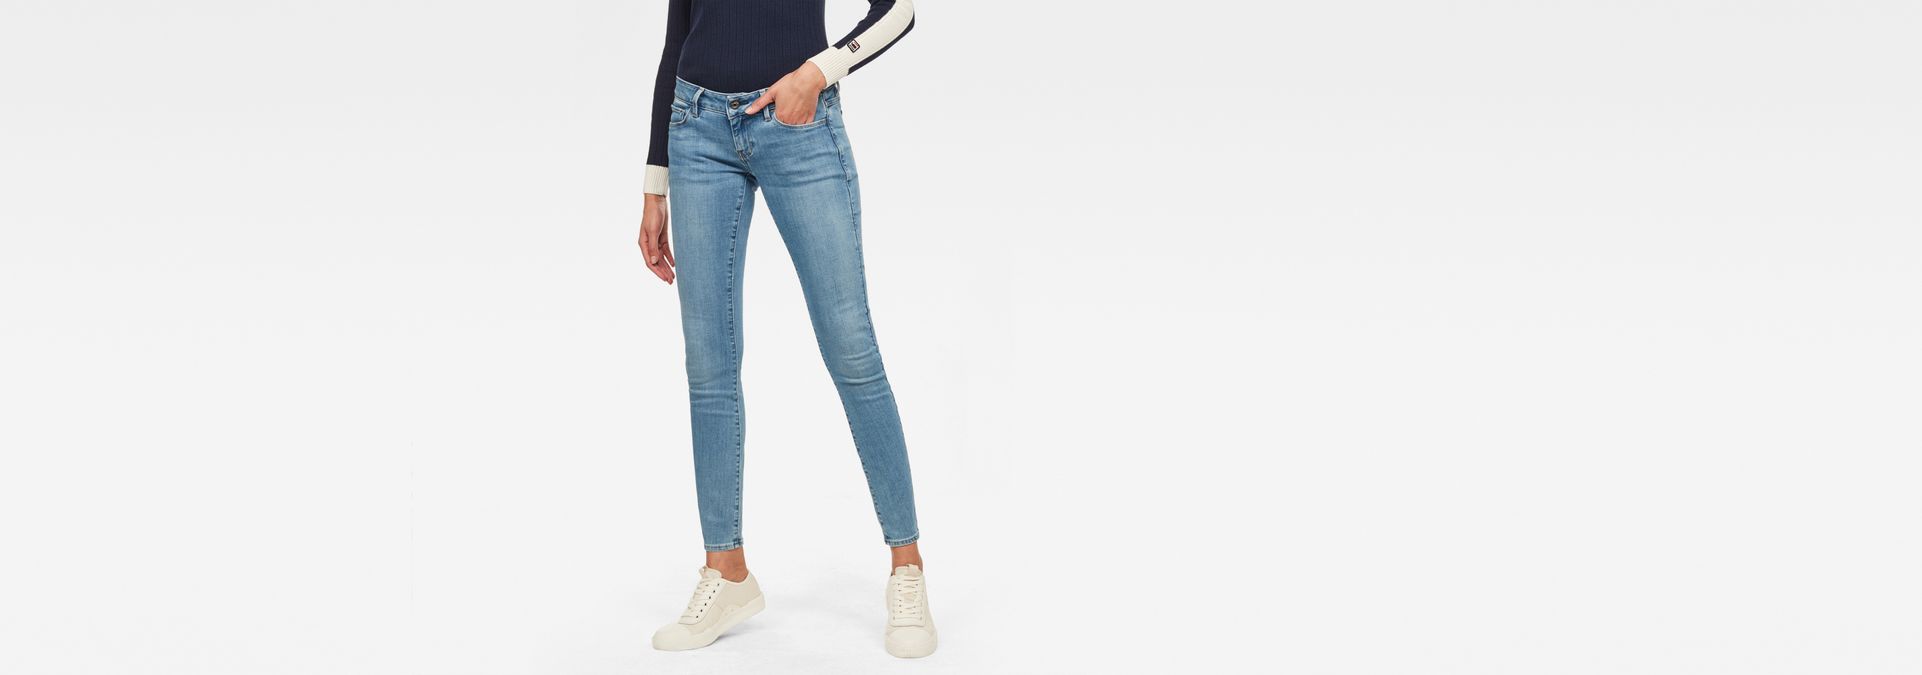 Mode Spijkerbroeken Low Rise jeans G-STAR RAW 3301 Denim Low Rise jeans blauw casual uitstraling 